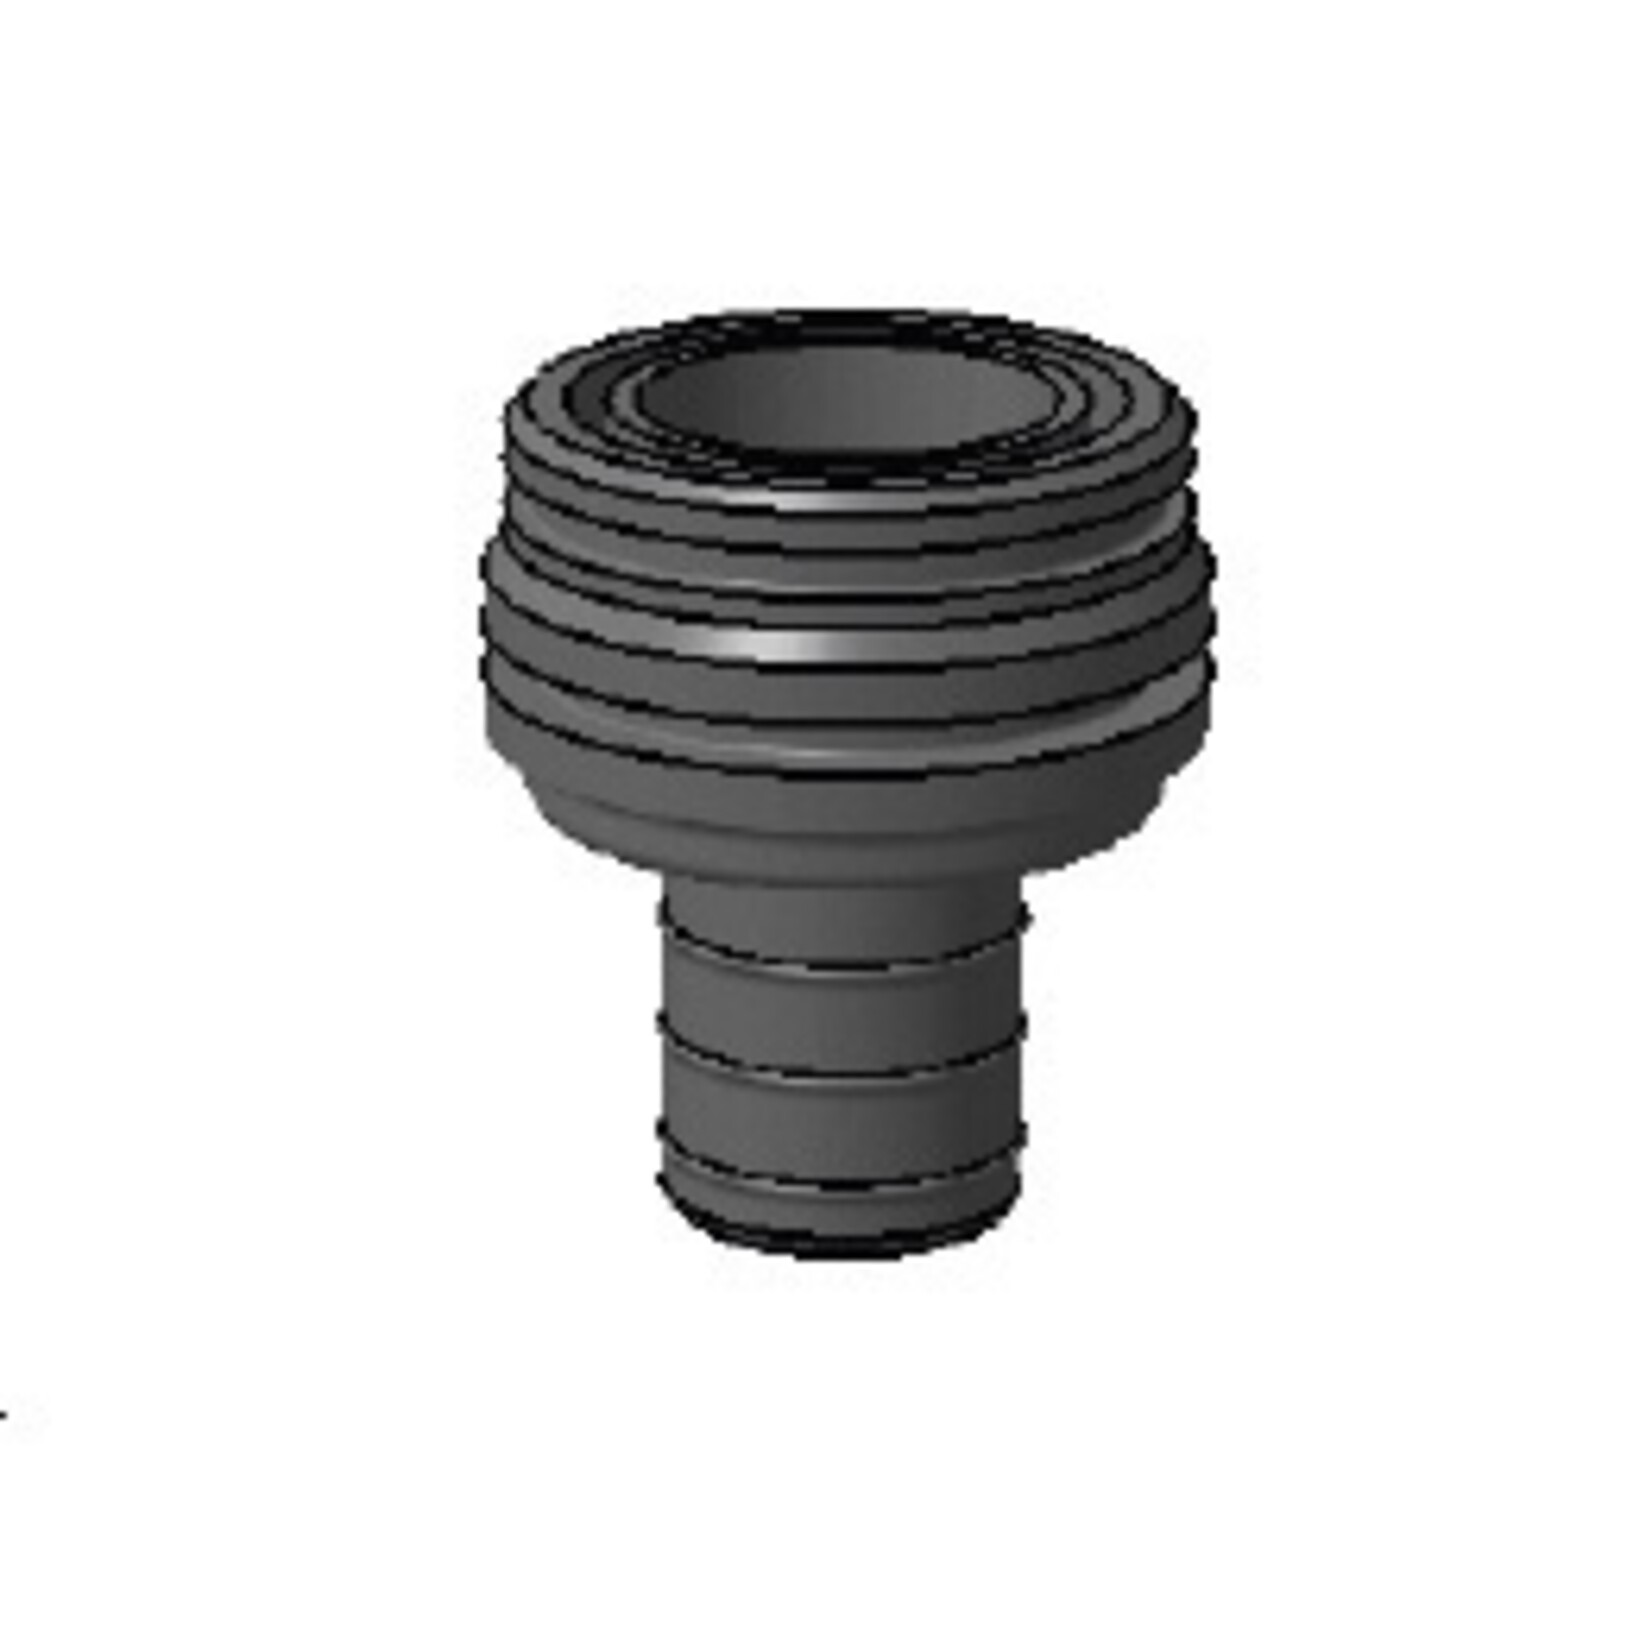 Plastimo Straight inlet 25mm + o ring